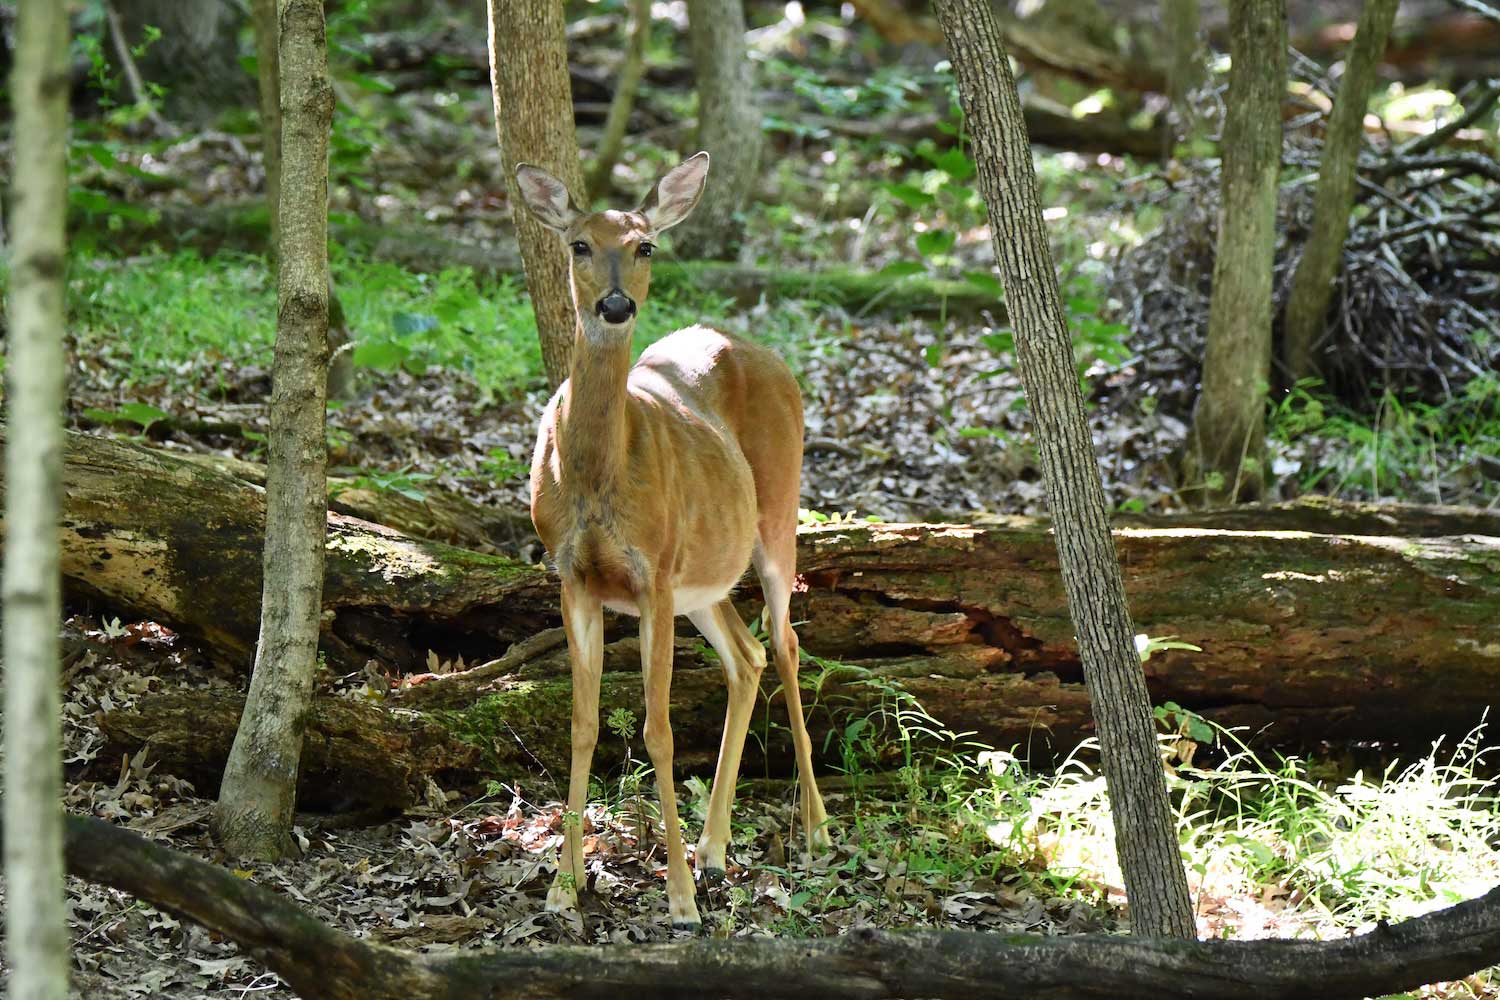 A deer standing in front of a log amidst standing trees.